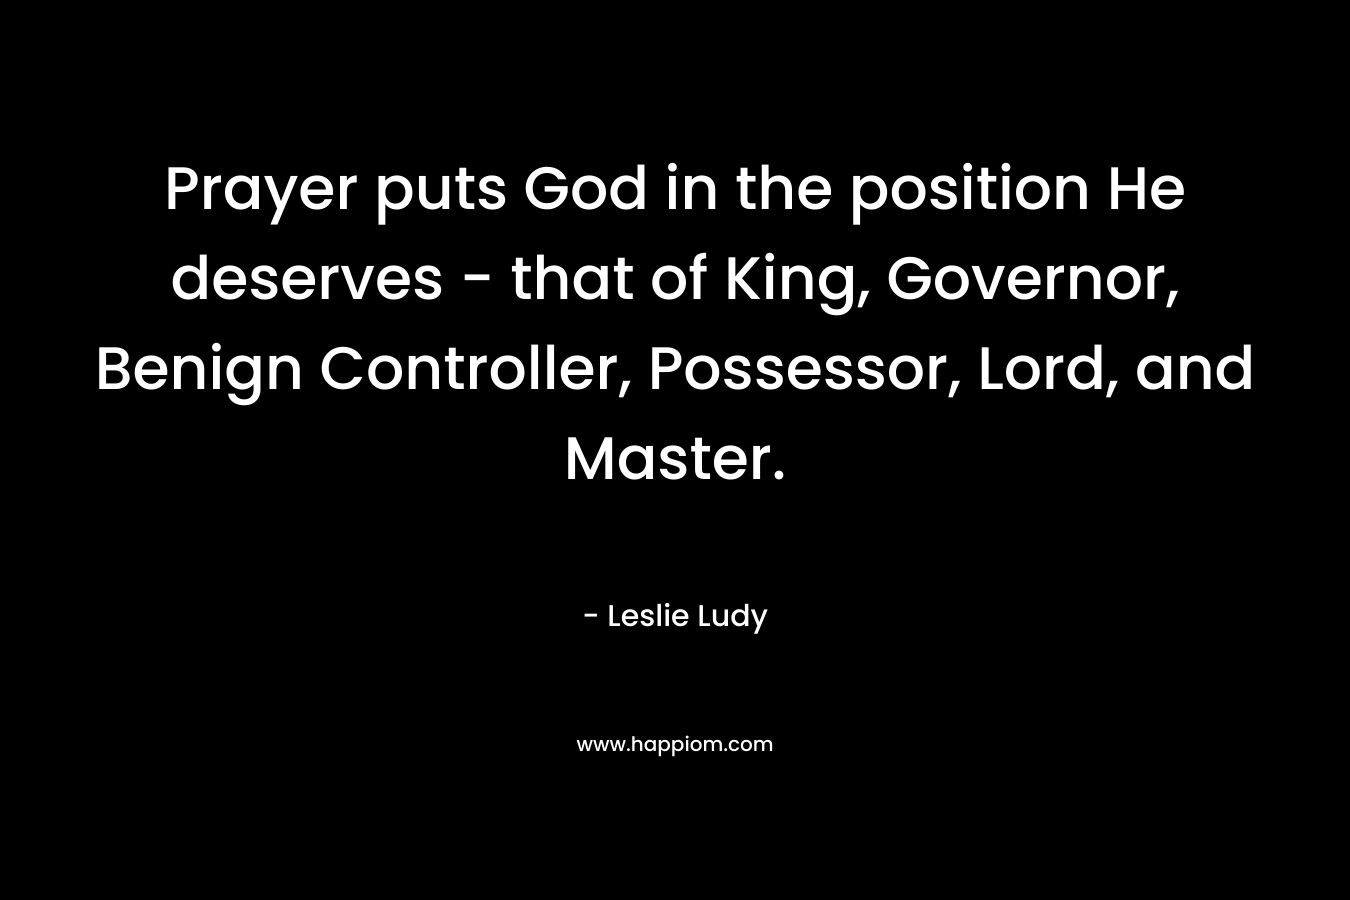 Prayer puts God in the position He deserves – that of King, Governor, Benign Controller, Possessor, Lord, and Master. – Leslie Ludy